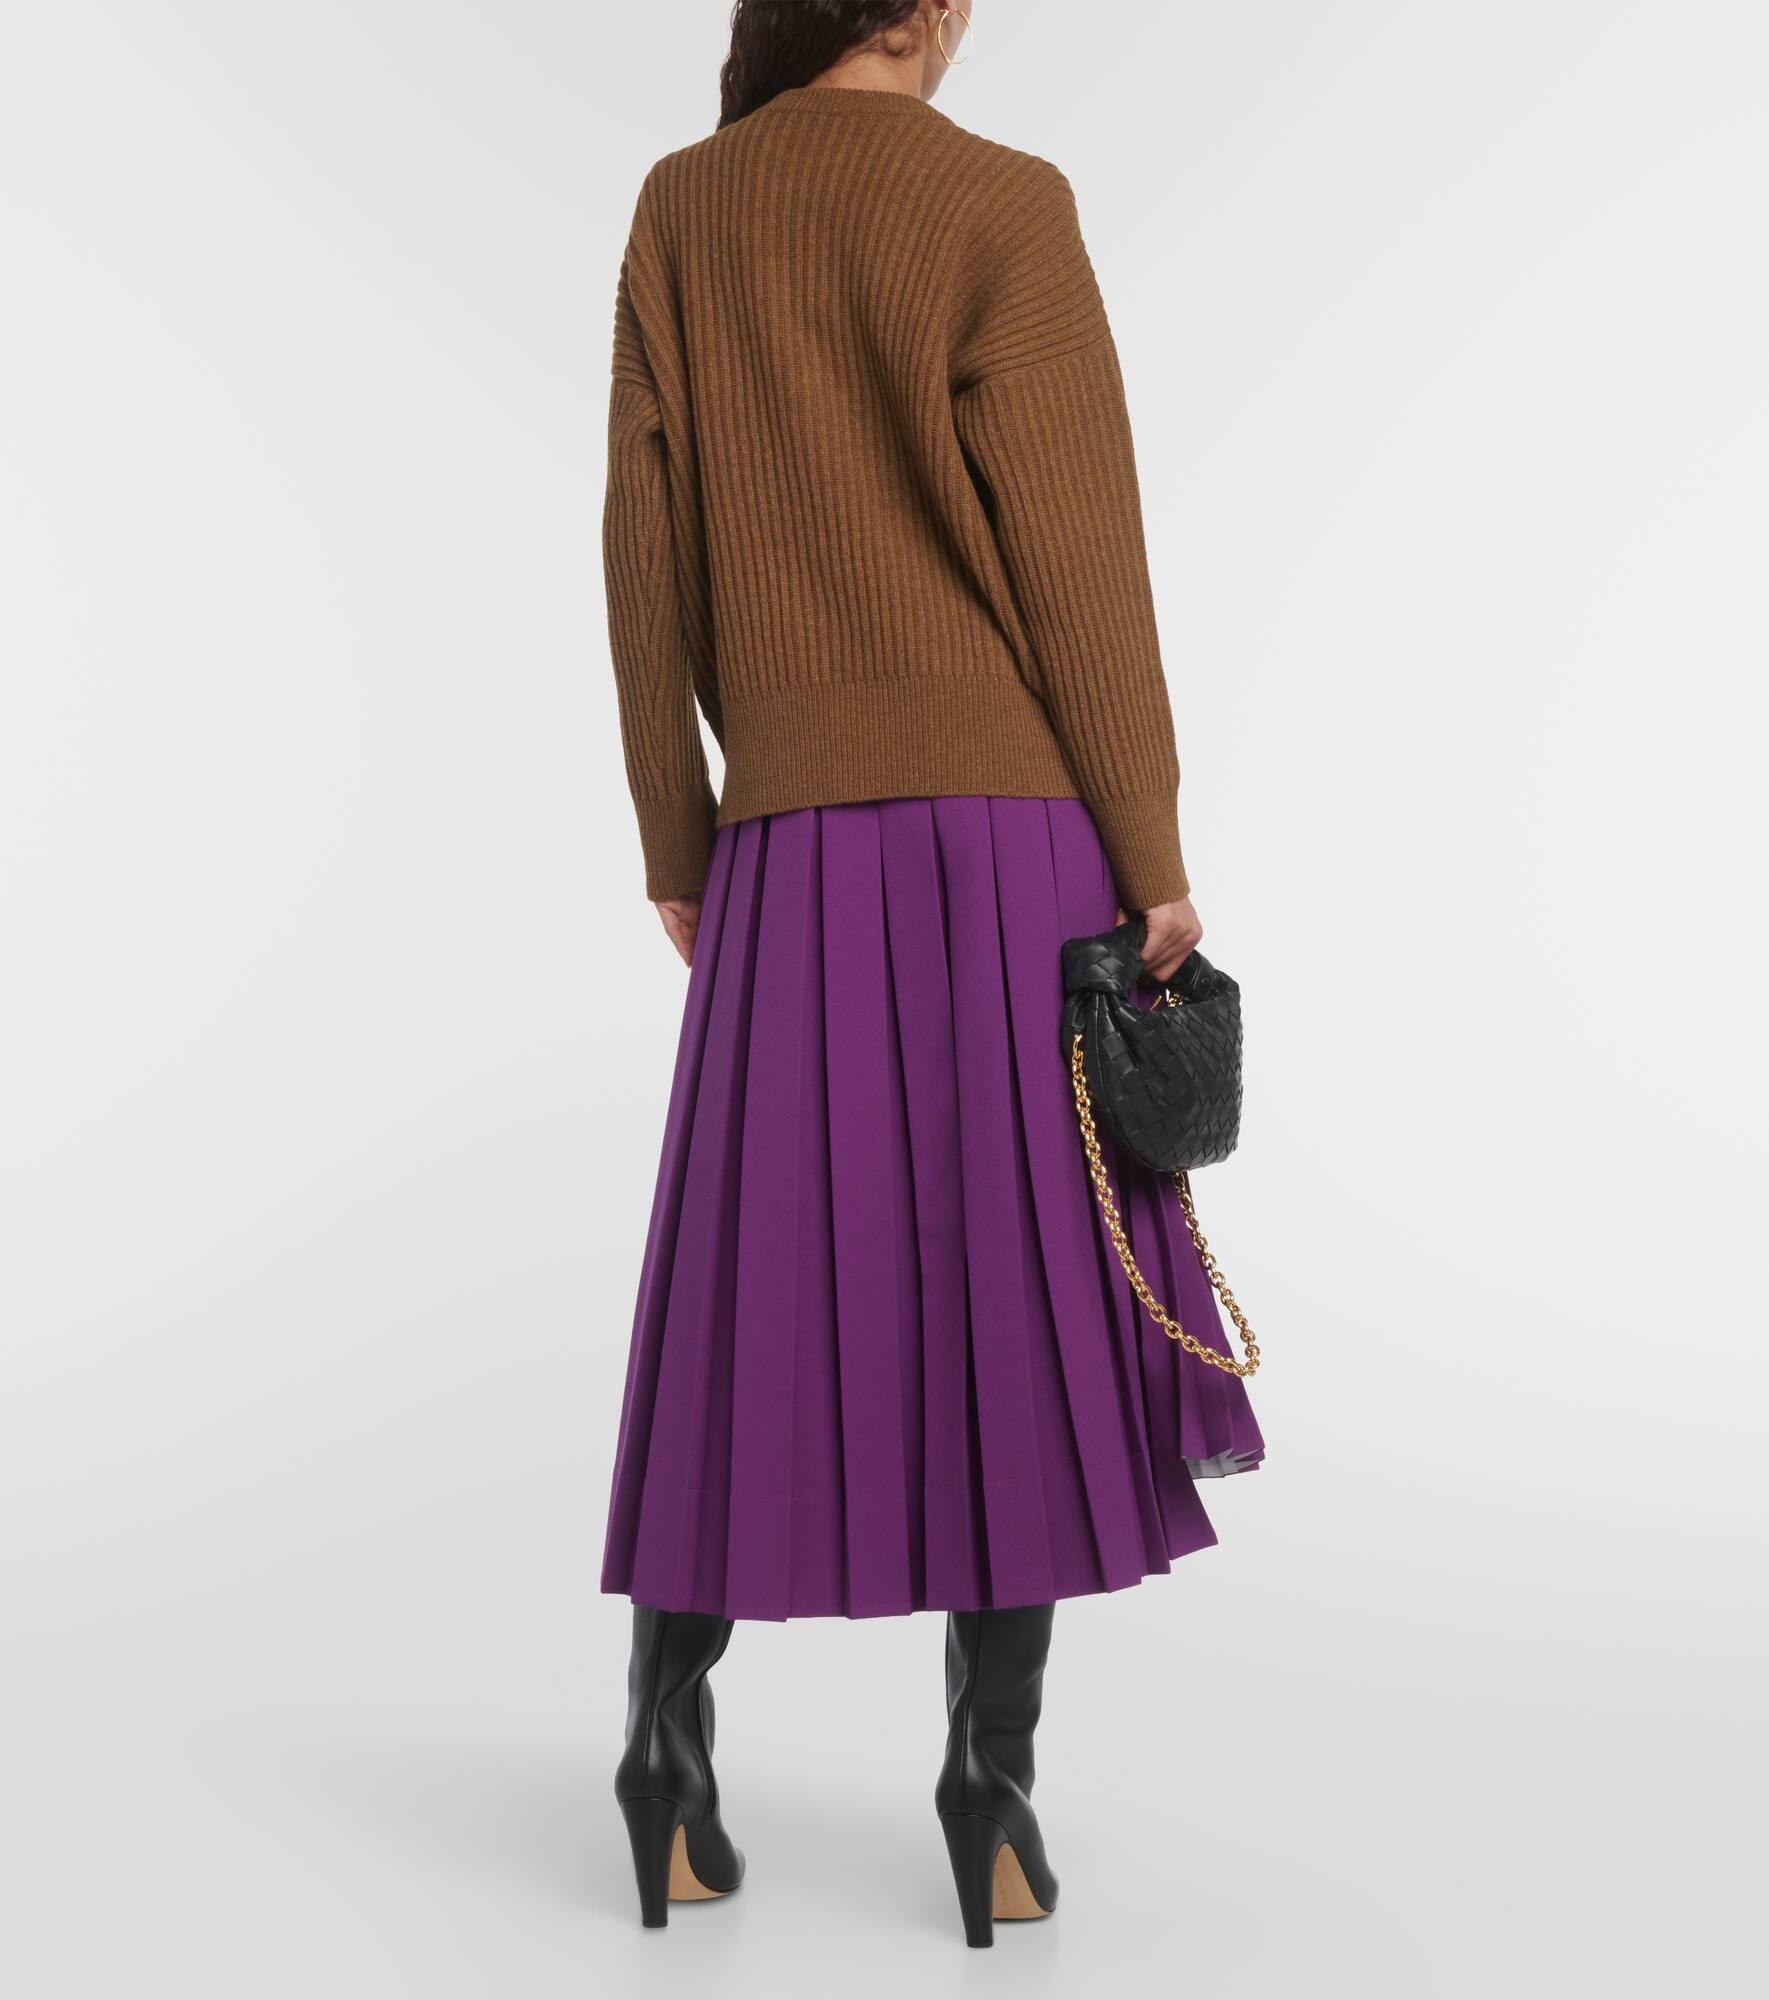 Wool and cashmere sweater - 3